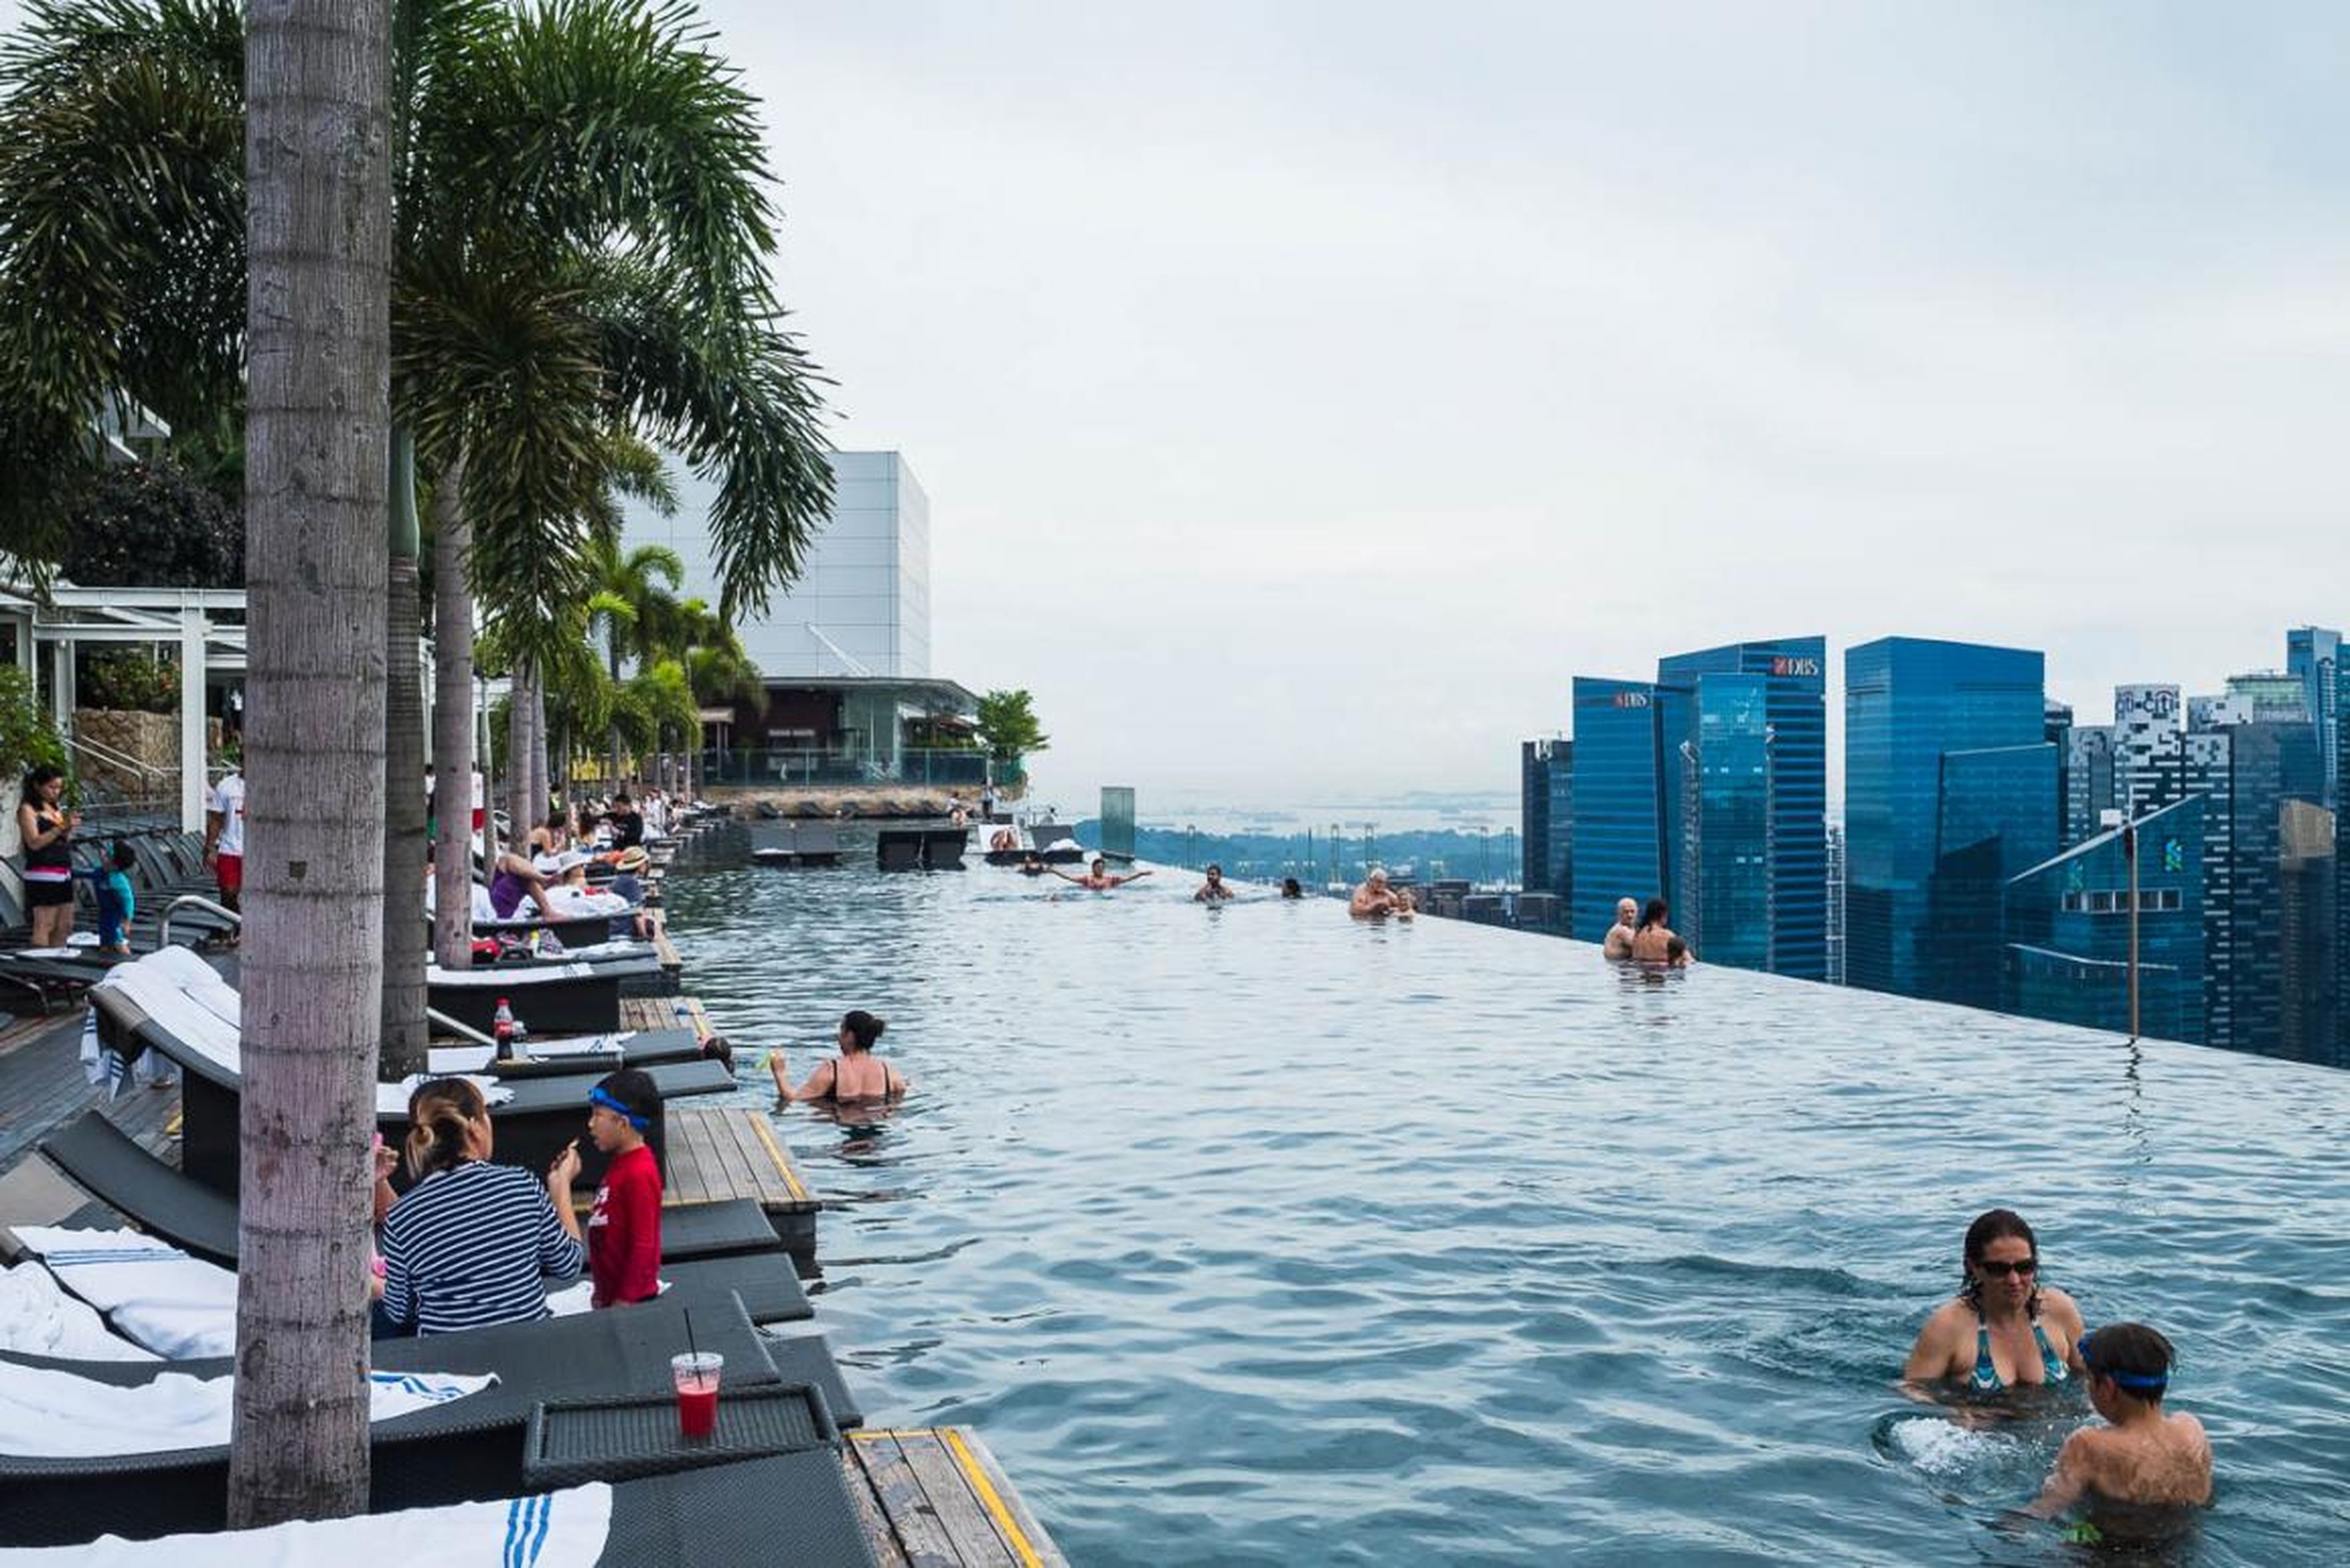 One thing that recurred during my travels was the difference between the magazine and Instagram images of a place and the reality. It was perhaps most striking at the Marina Bay Sands, a landmark building in Singapore that